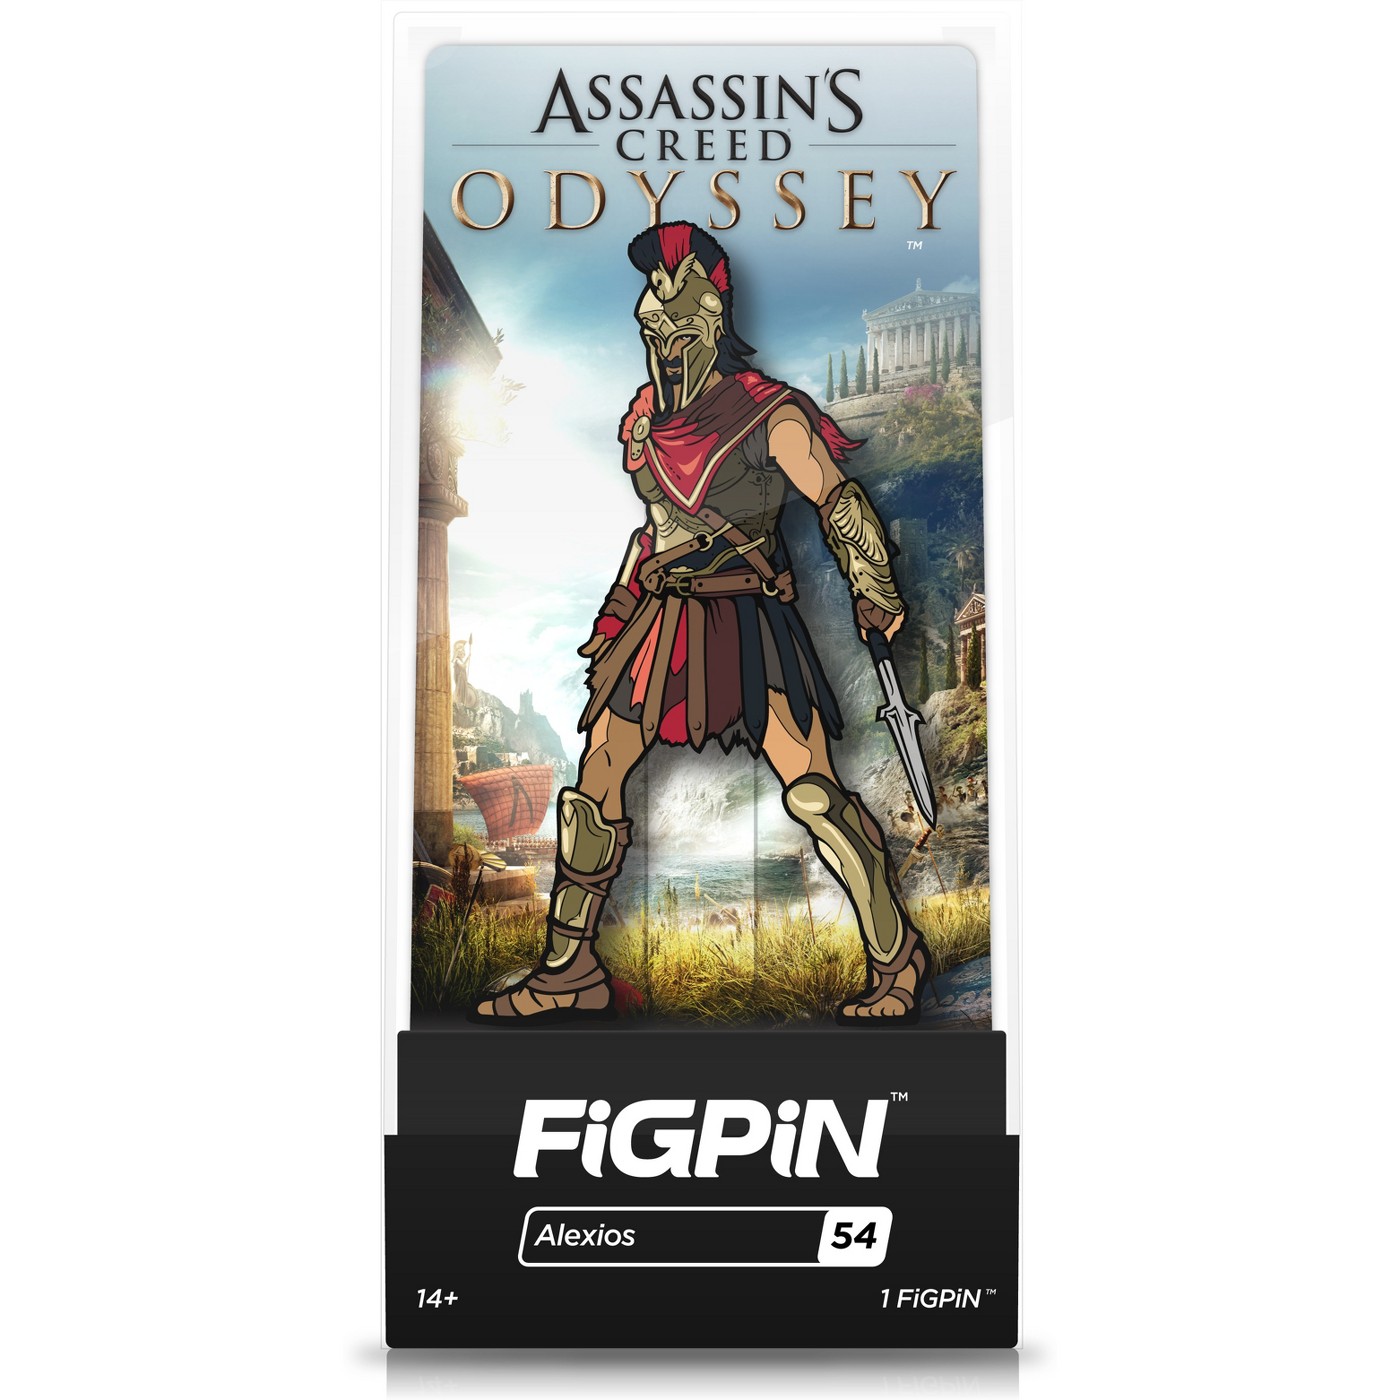 FiGPiN Assassin's Creed: Odyssey - Alexios - image 1 of 1